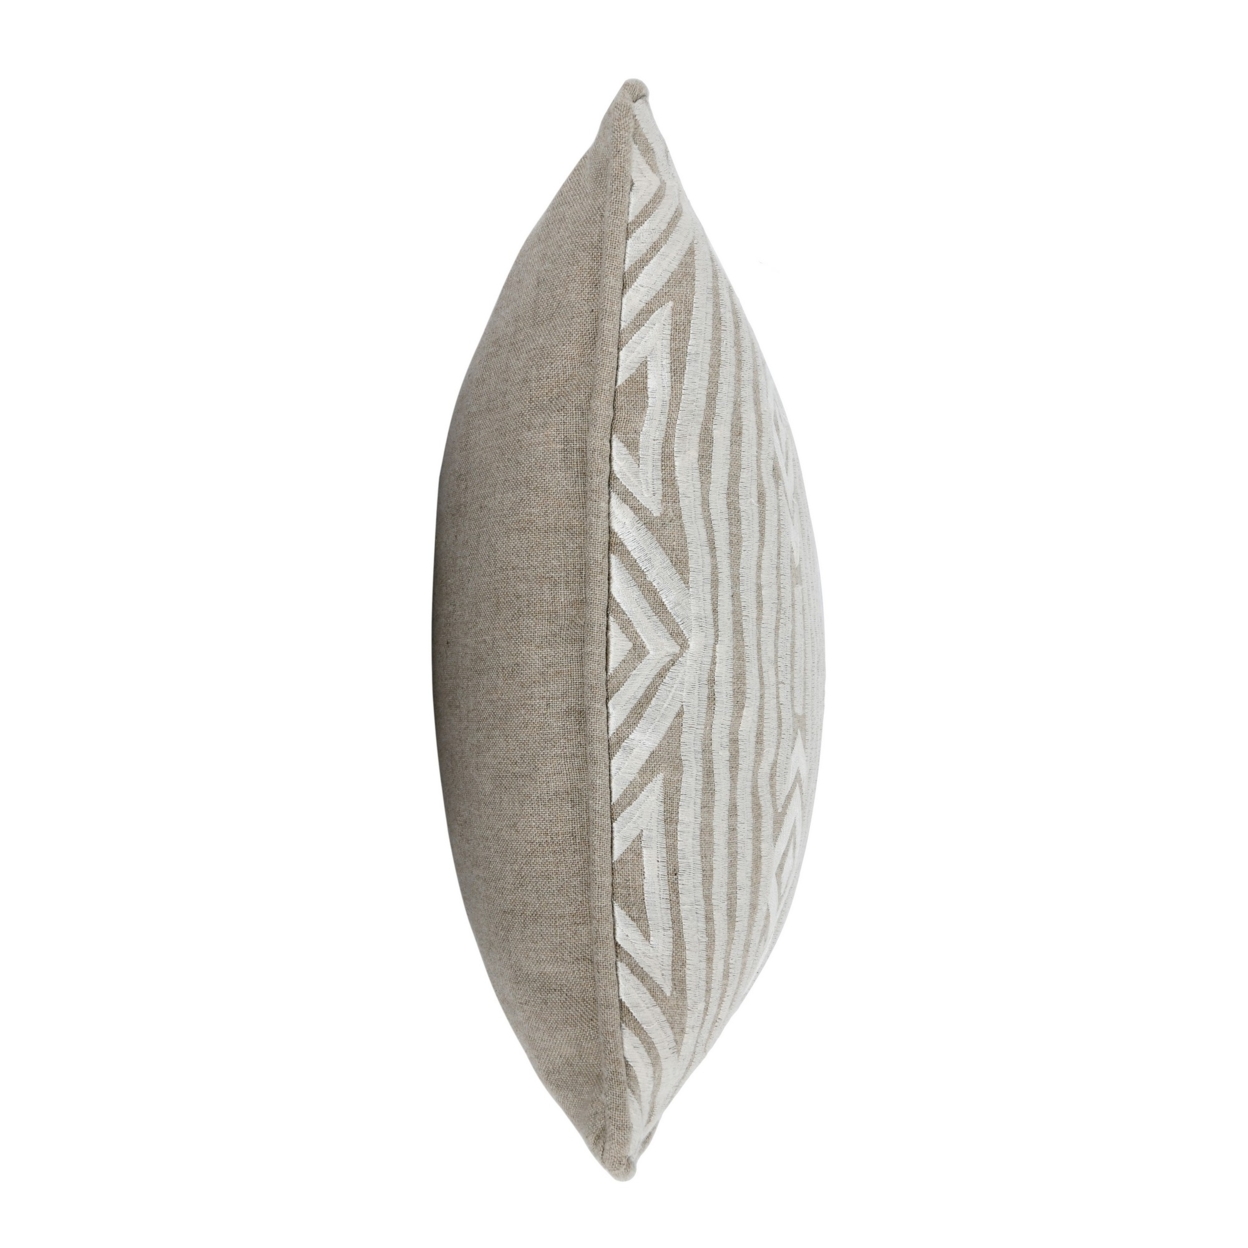 12 X 16 Square Linen Accent Throw Pillow, Tribal Accent, Piped Edges, Ivory, Saltoro Sherpi